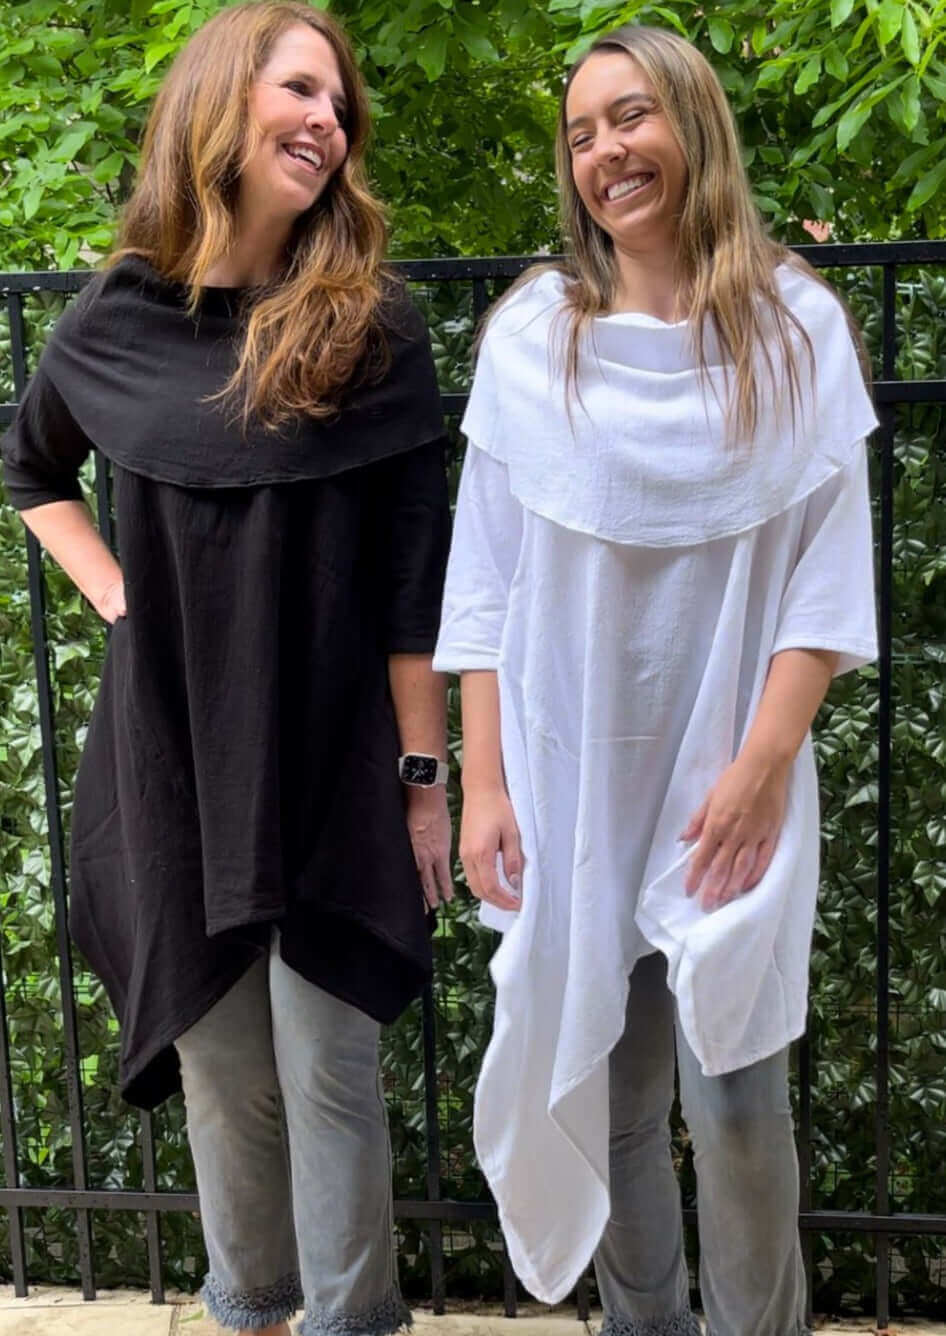 Made in USA Women's 100% Cotton Lightweight Asymmetrical Cowl Neck Long Line Tunic in Black or White | Classy Cozy Cool Women's Made in America Boutique